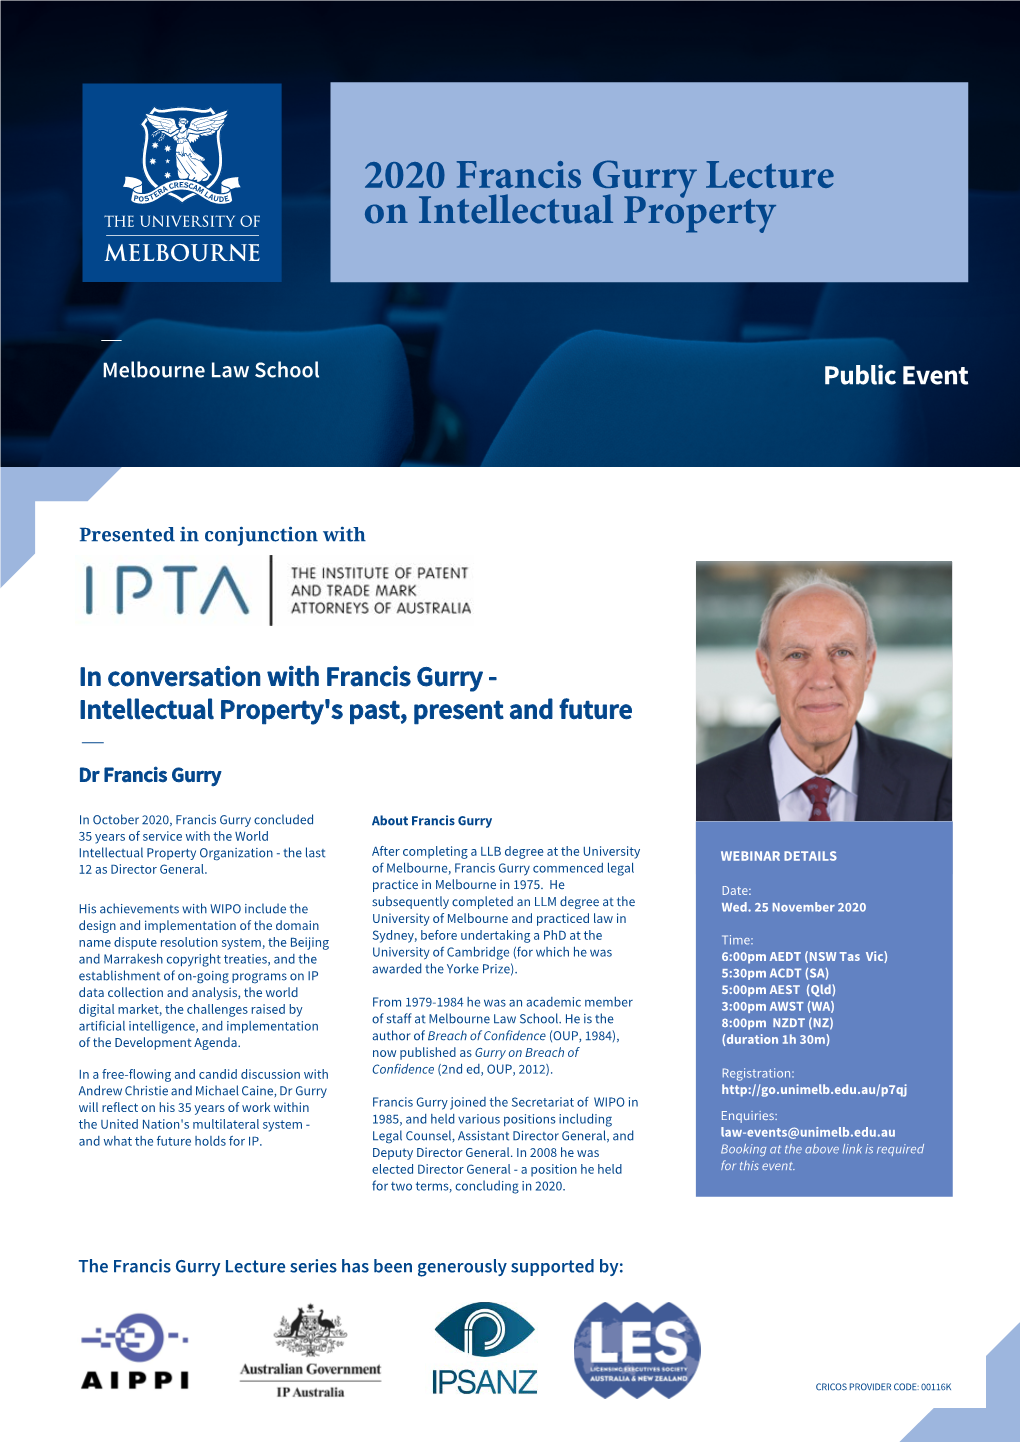 2020 Francis Gurry Lecture on Intellectual Property